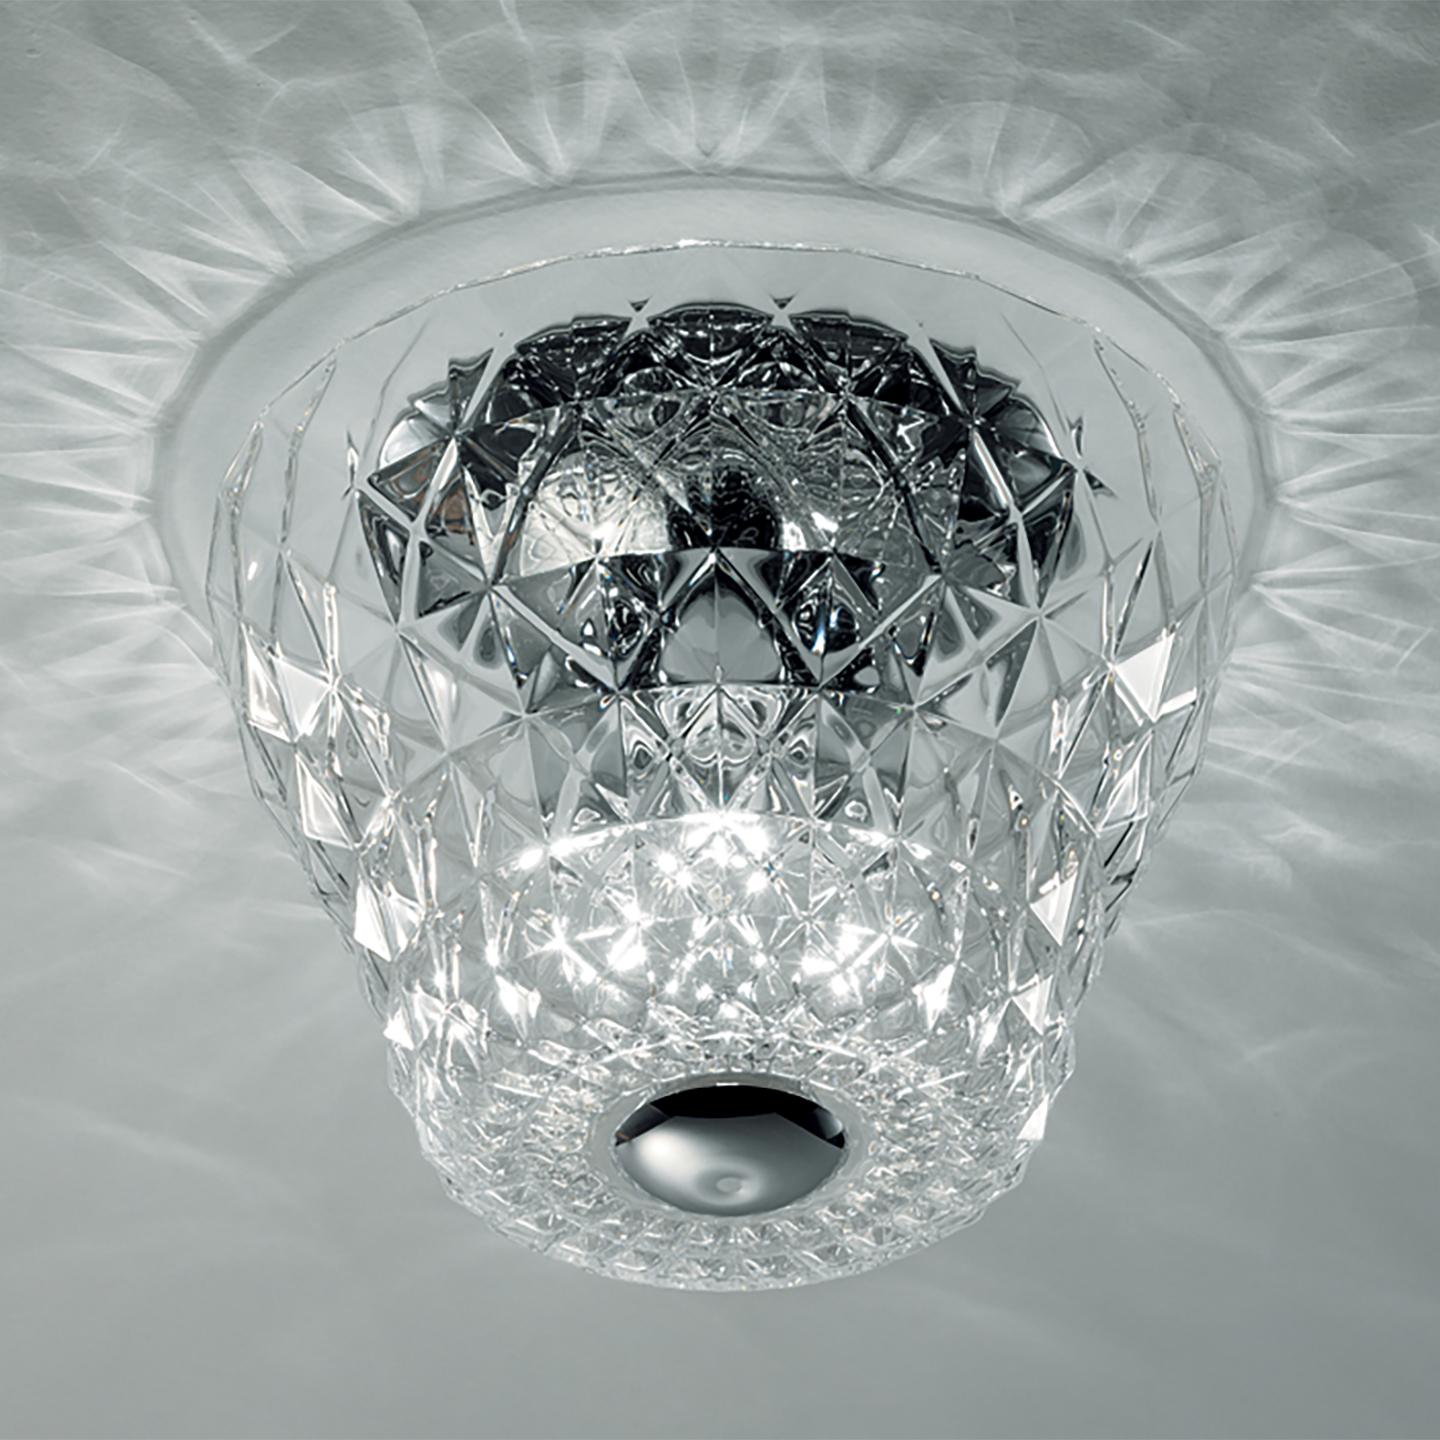 The Atelier ceiling lamp, designed by Archirivolto, is an elegant bowl of crystal that dazzles and sparkles. Atelier, which means “workshop” in English, features beautiful, handmade cut crystal that hangs gracefully from the ceiling. The